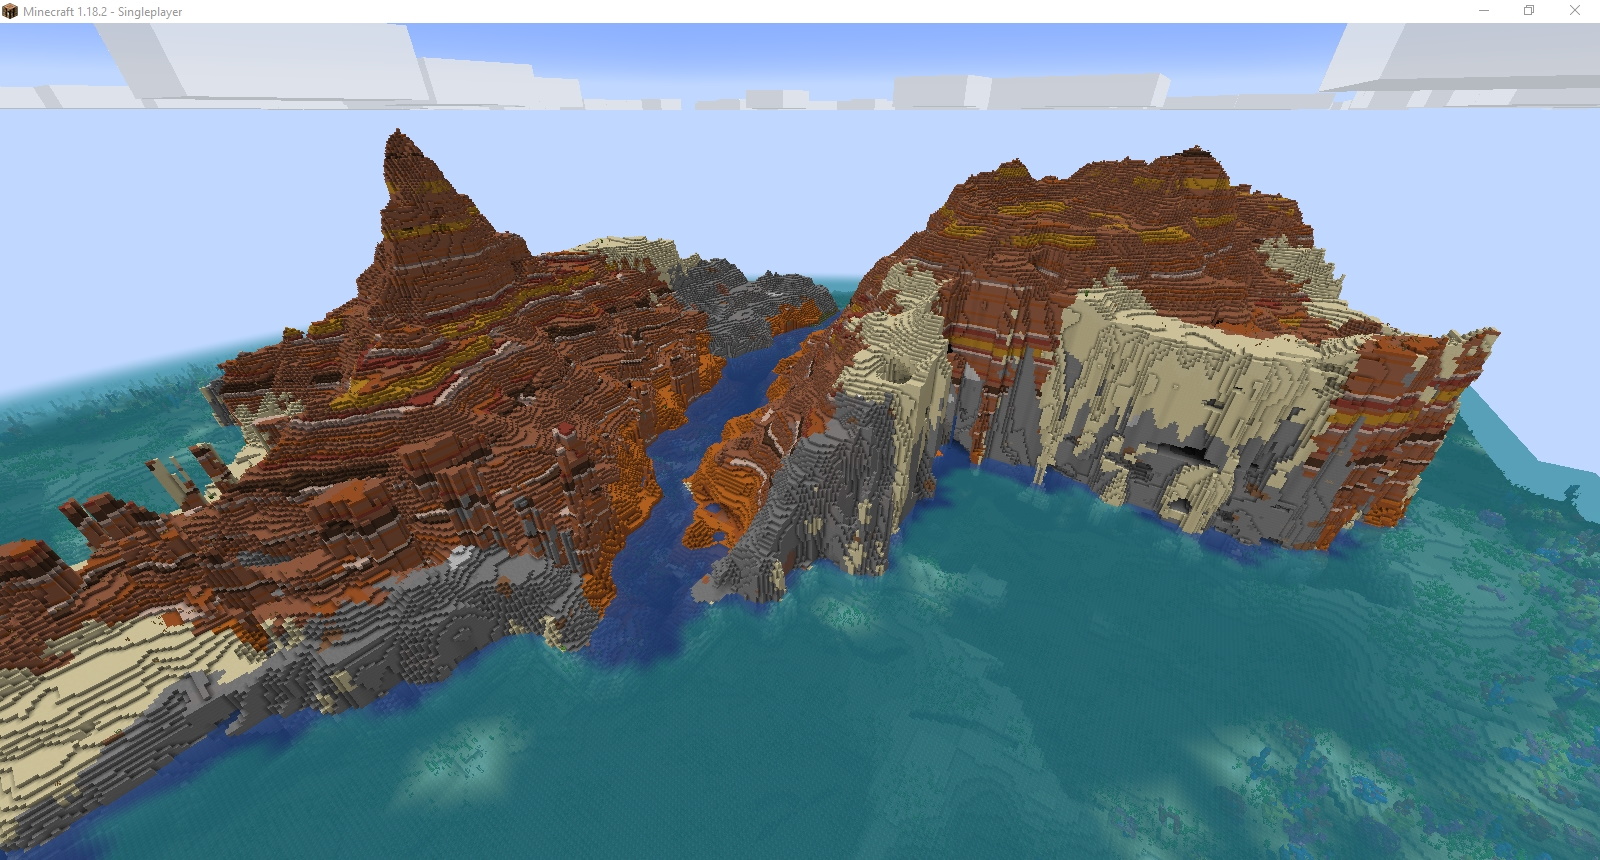 Minecraft seeds - A massive badlands island is bisected by a river